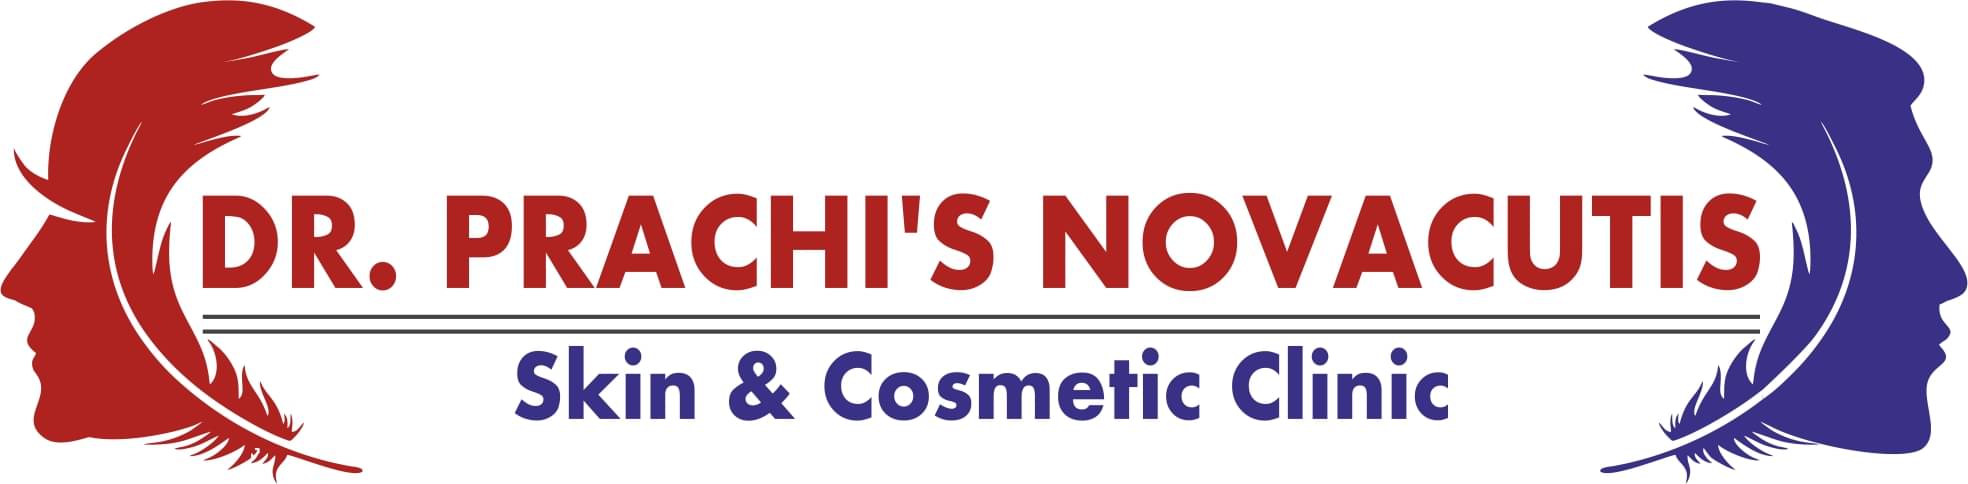 dr. prachi's novacutis skin clinic in andheri east, mumbai - book appointment, view contact number, feedbacks, address | dr. prachi patil